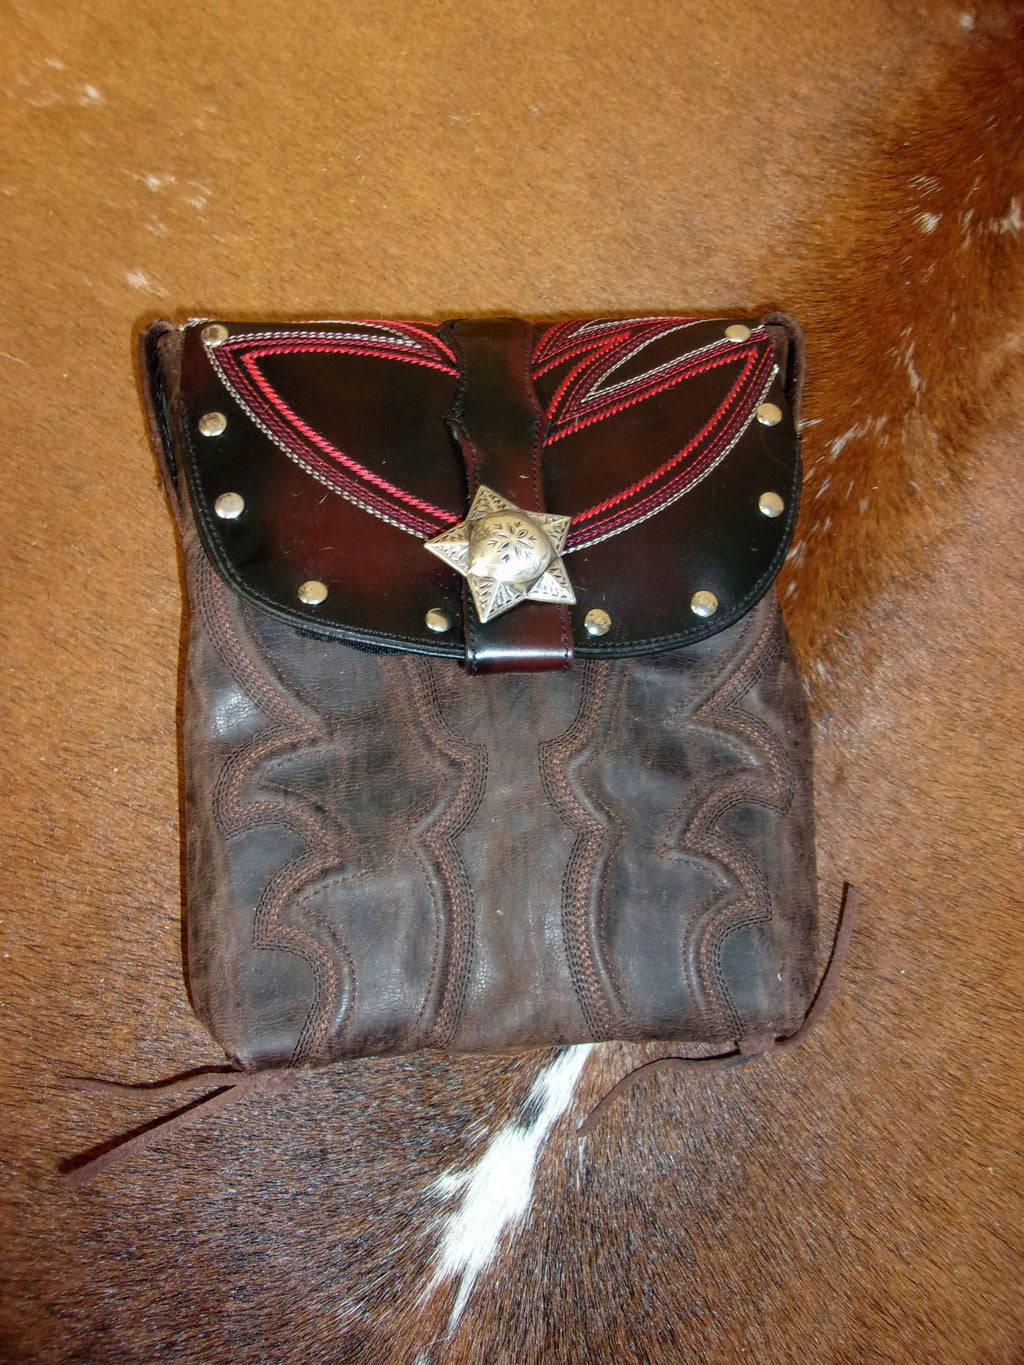 Billet Strap Bag - Small Cowboy Boot Purse - Small Leather Riding Bag BB20 cowboy boot purses, western fringe purse, handmade leather purses, boot purse, handmade western purse, custom leather handbags Chris Thompson Bags